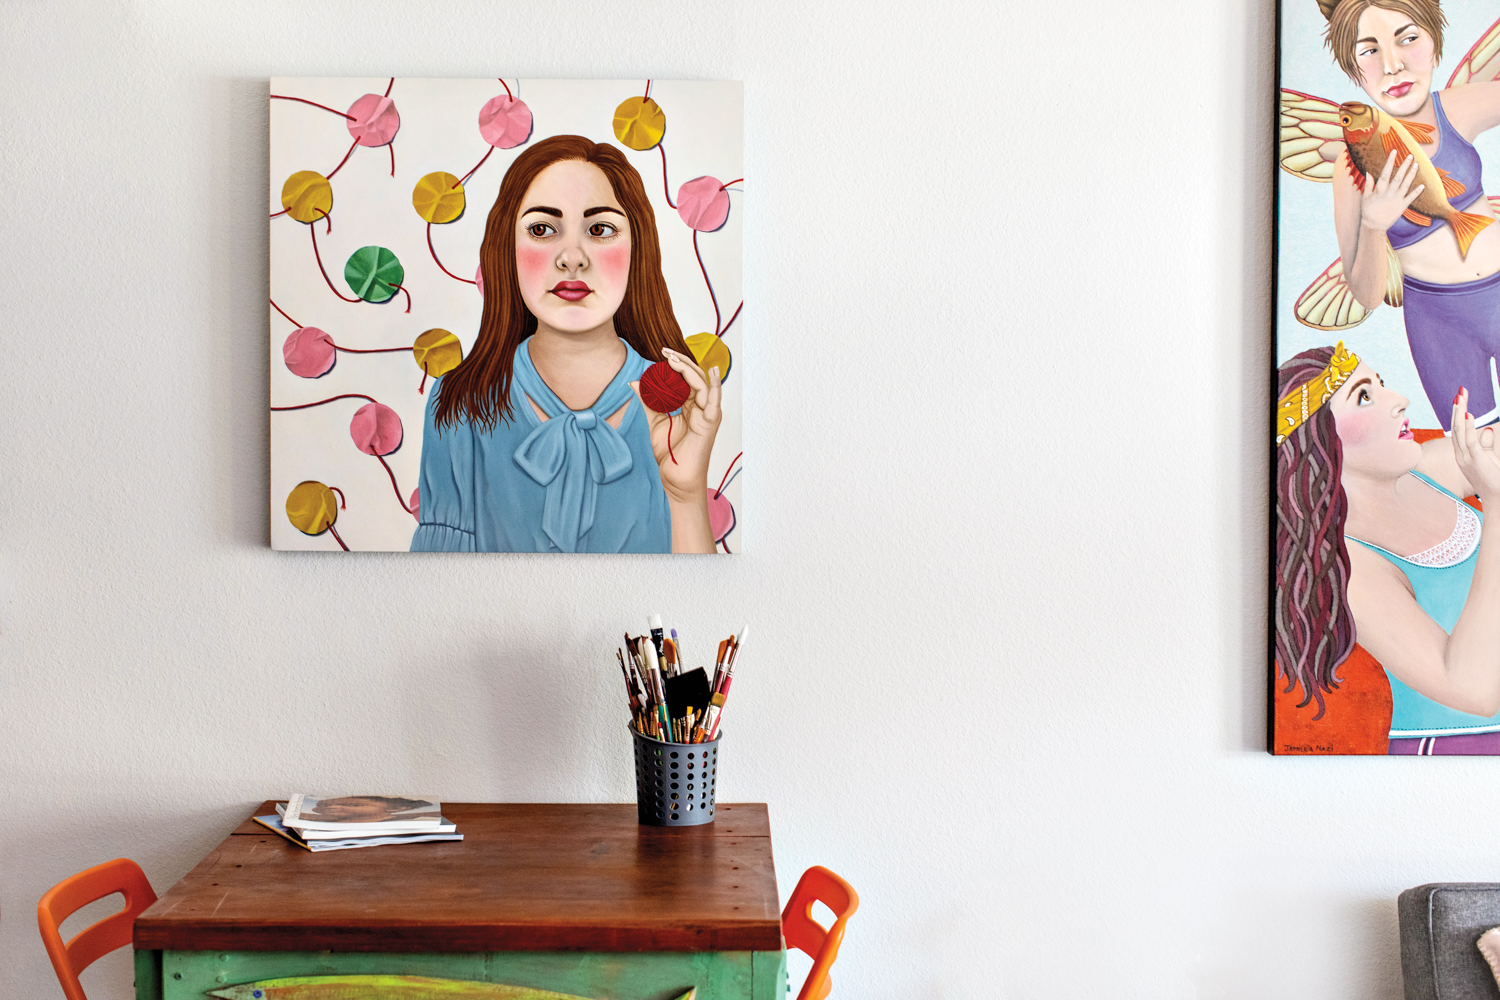 A painting of a girl in a blue shirt holding a red ball of yarn. Below is a desk with paint brushes on top. To the right, you can see part of another painting.